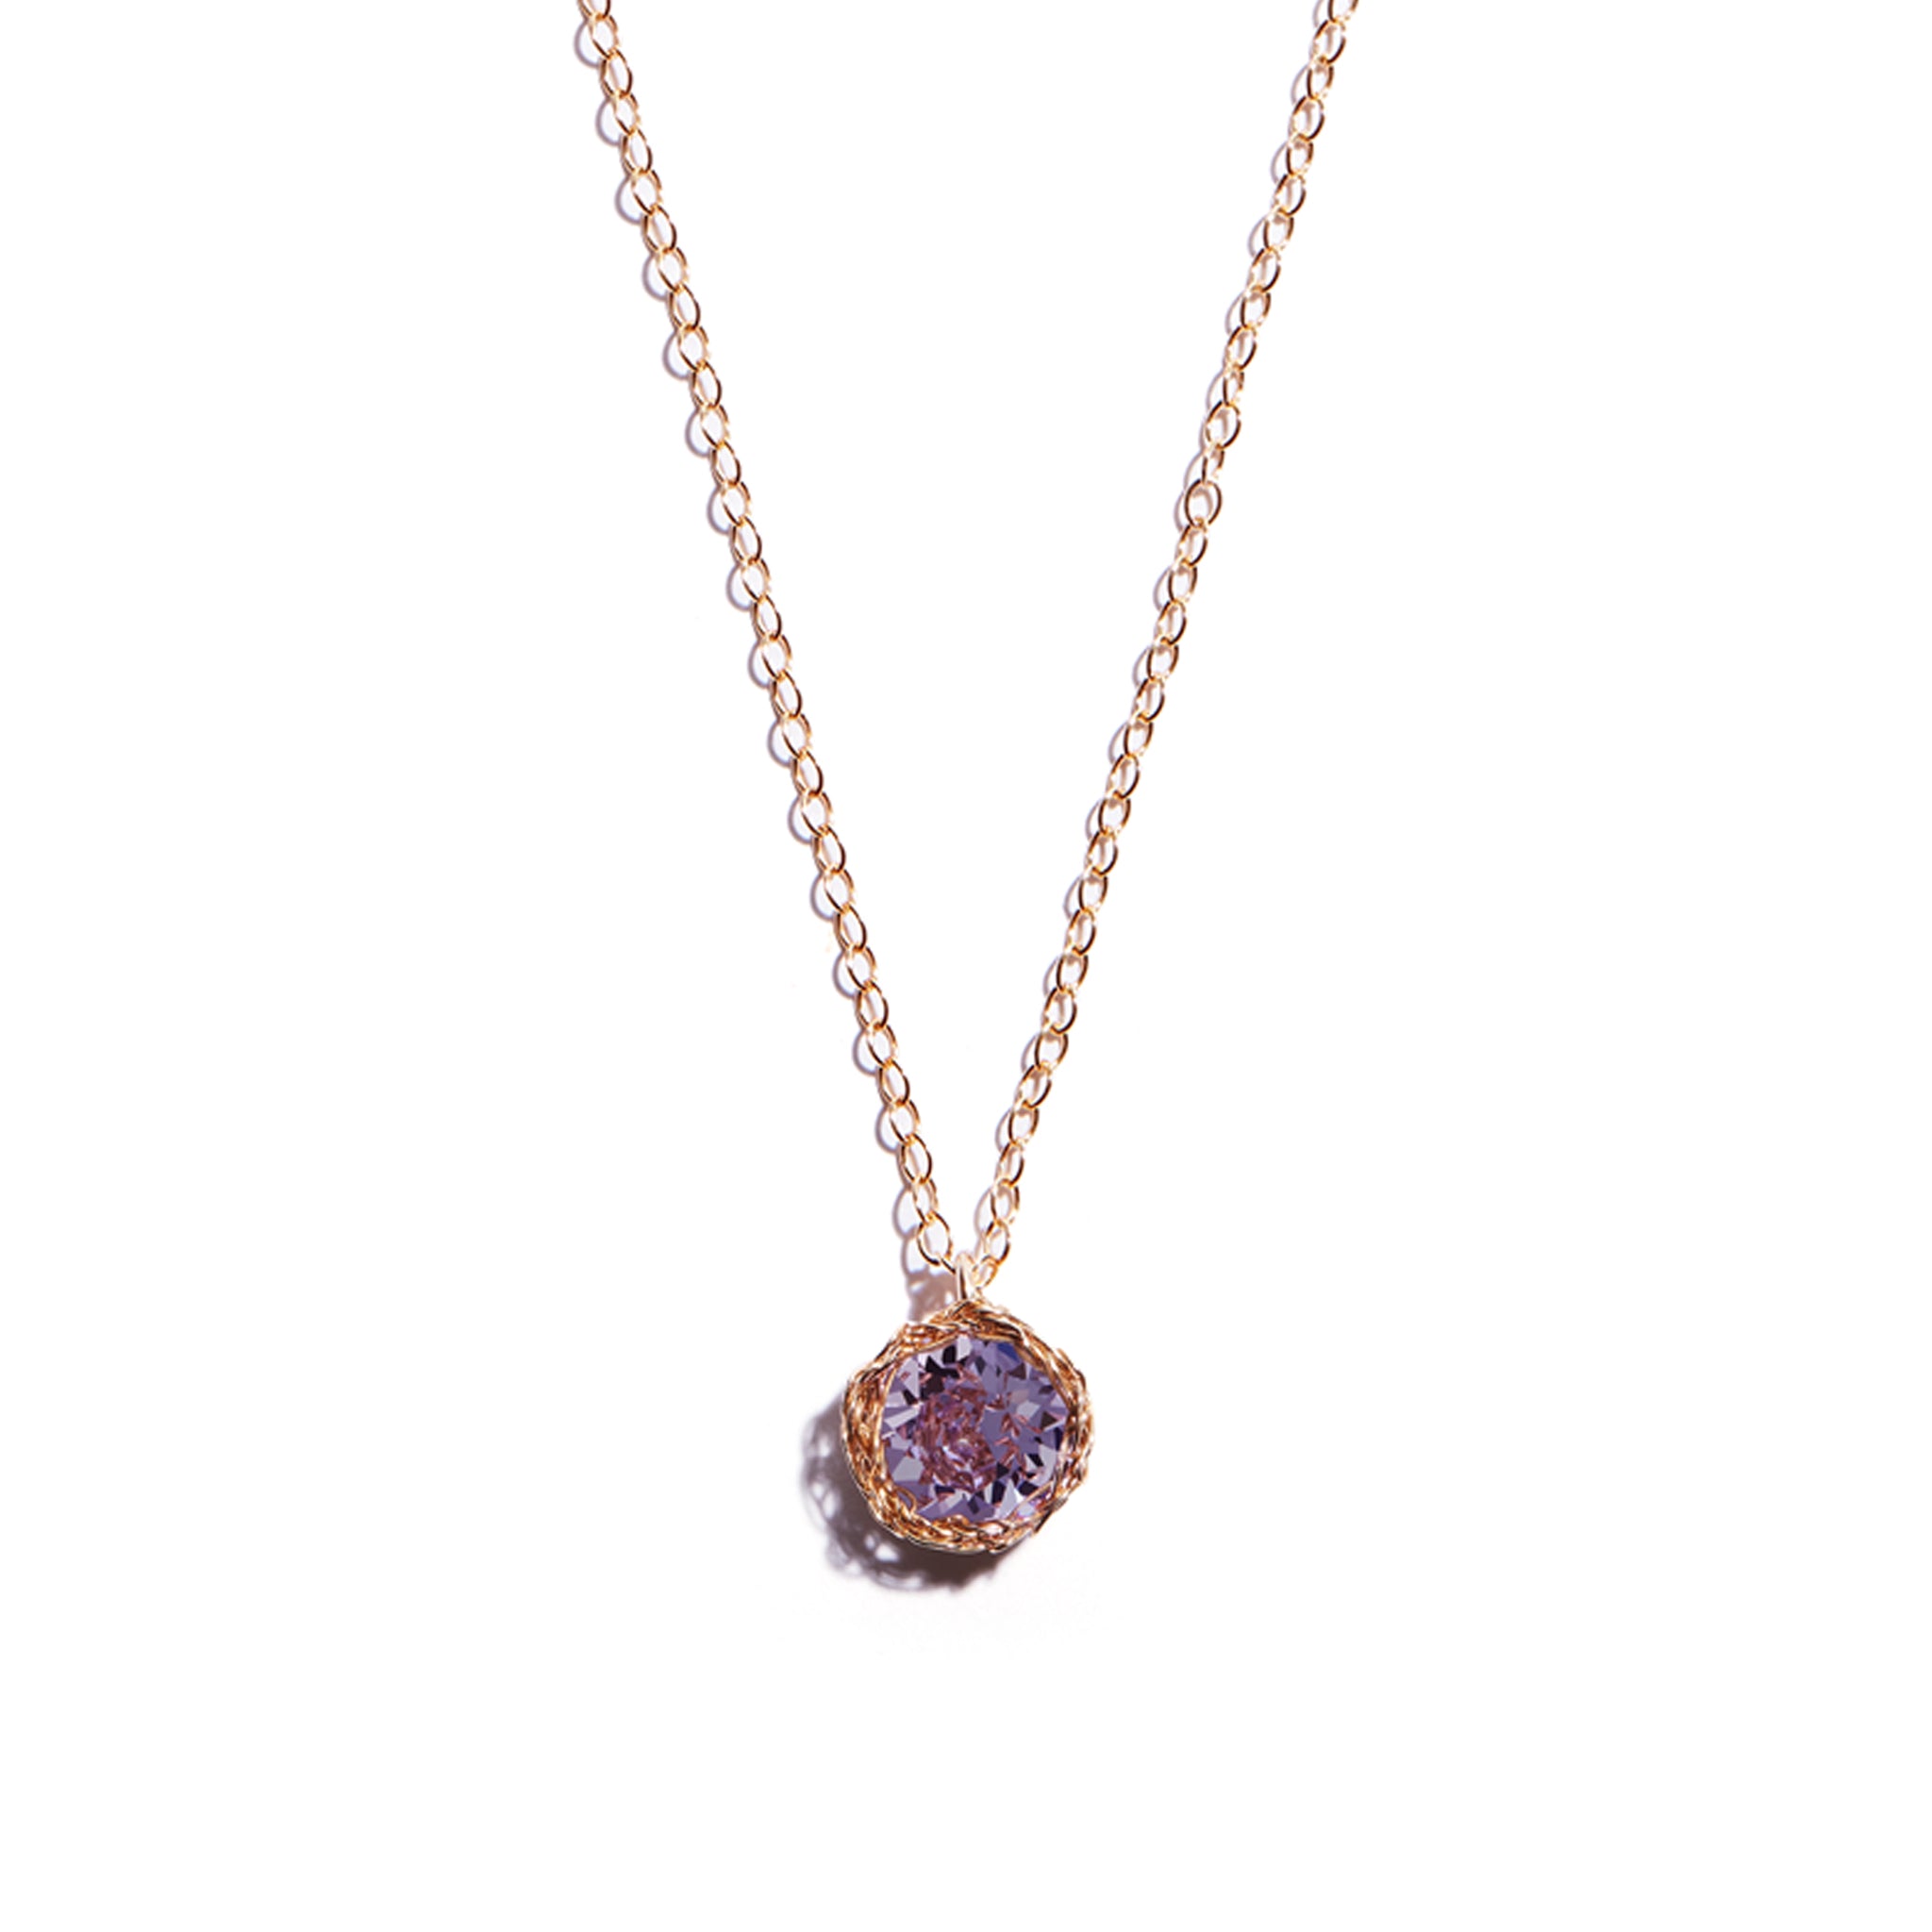 Close-up photo of a crochet necklace featuring a February birthstone pendant made of amethyst, set in 14 ct gold-filled metal.